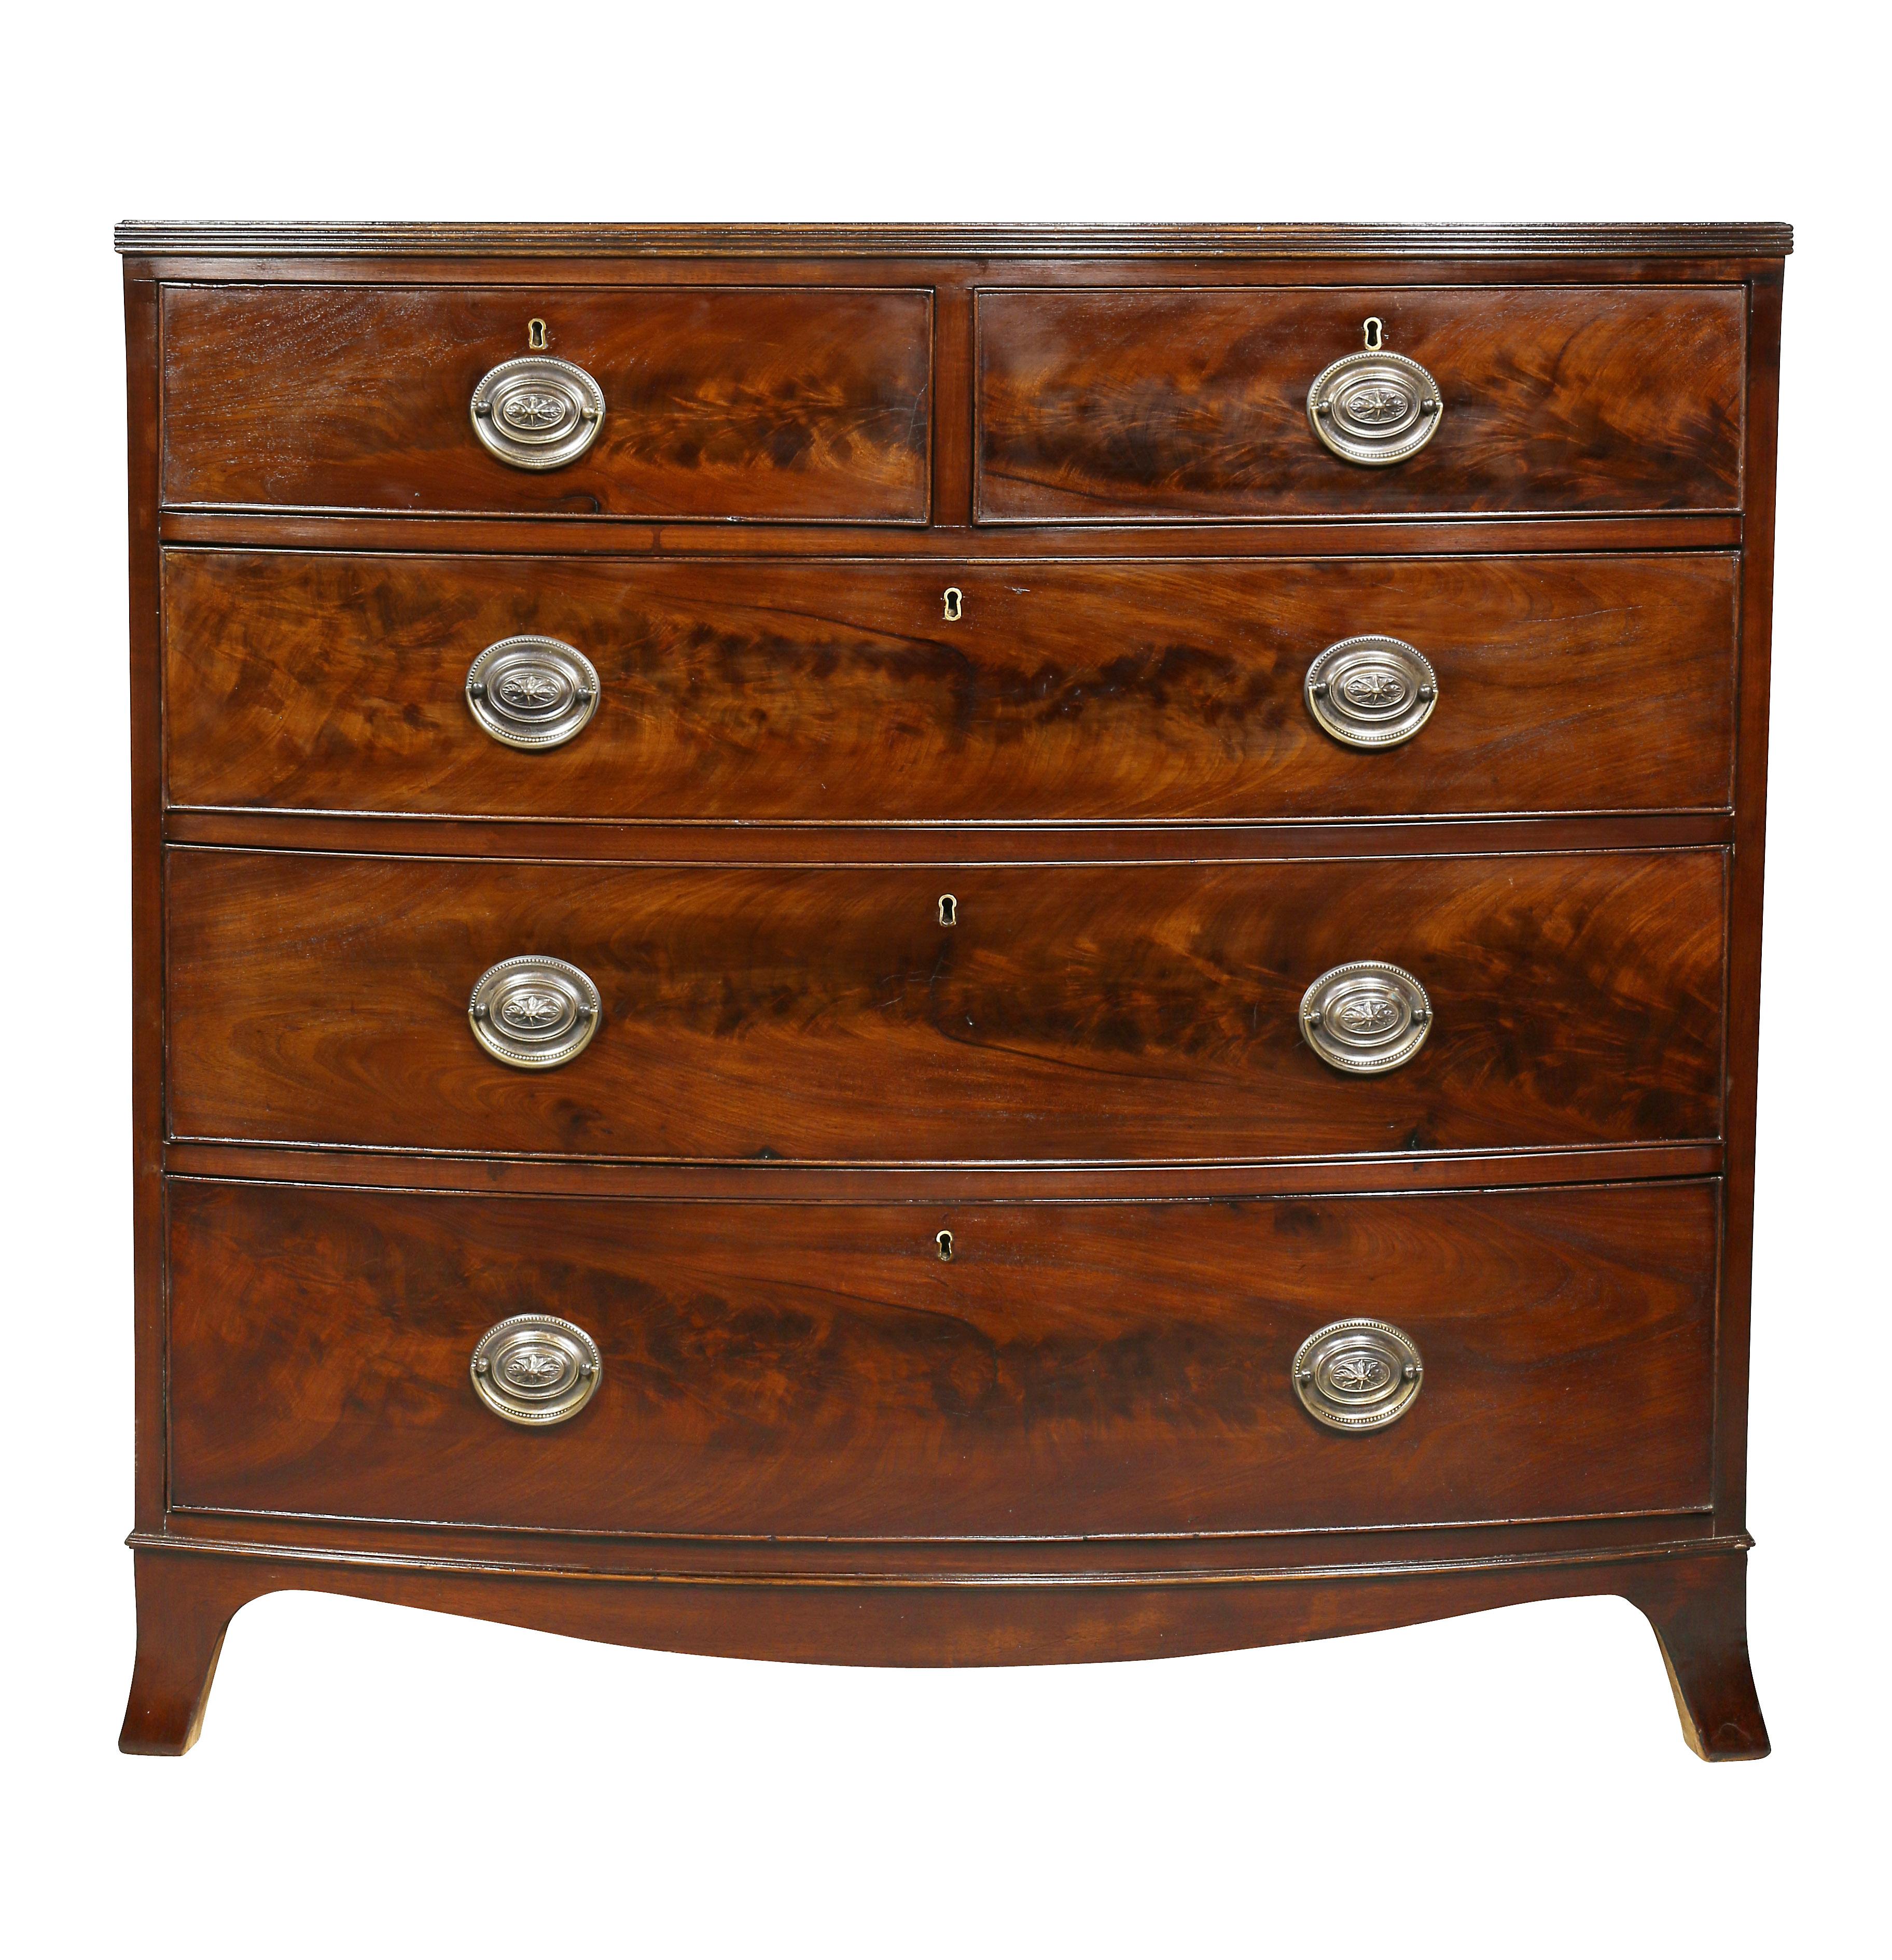 Bowed top over two over three drawers, splayed bracket feet. Oval brass handles.